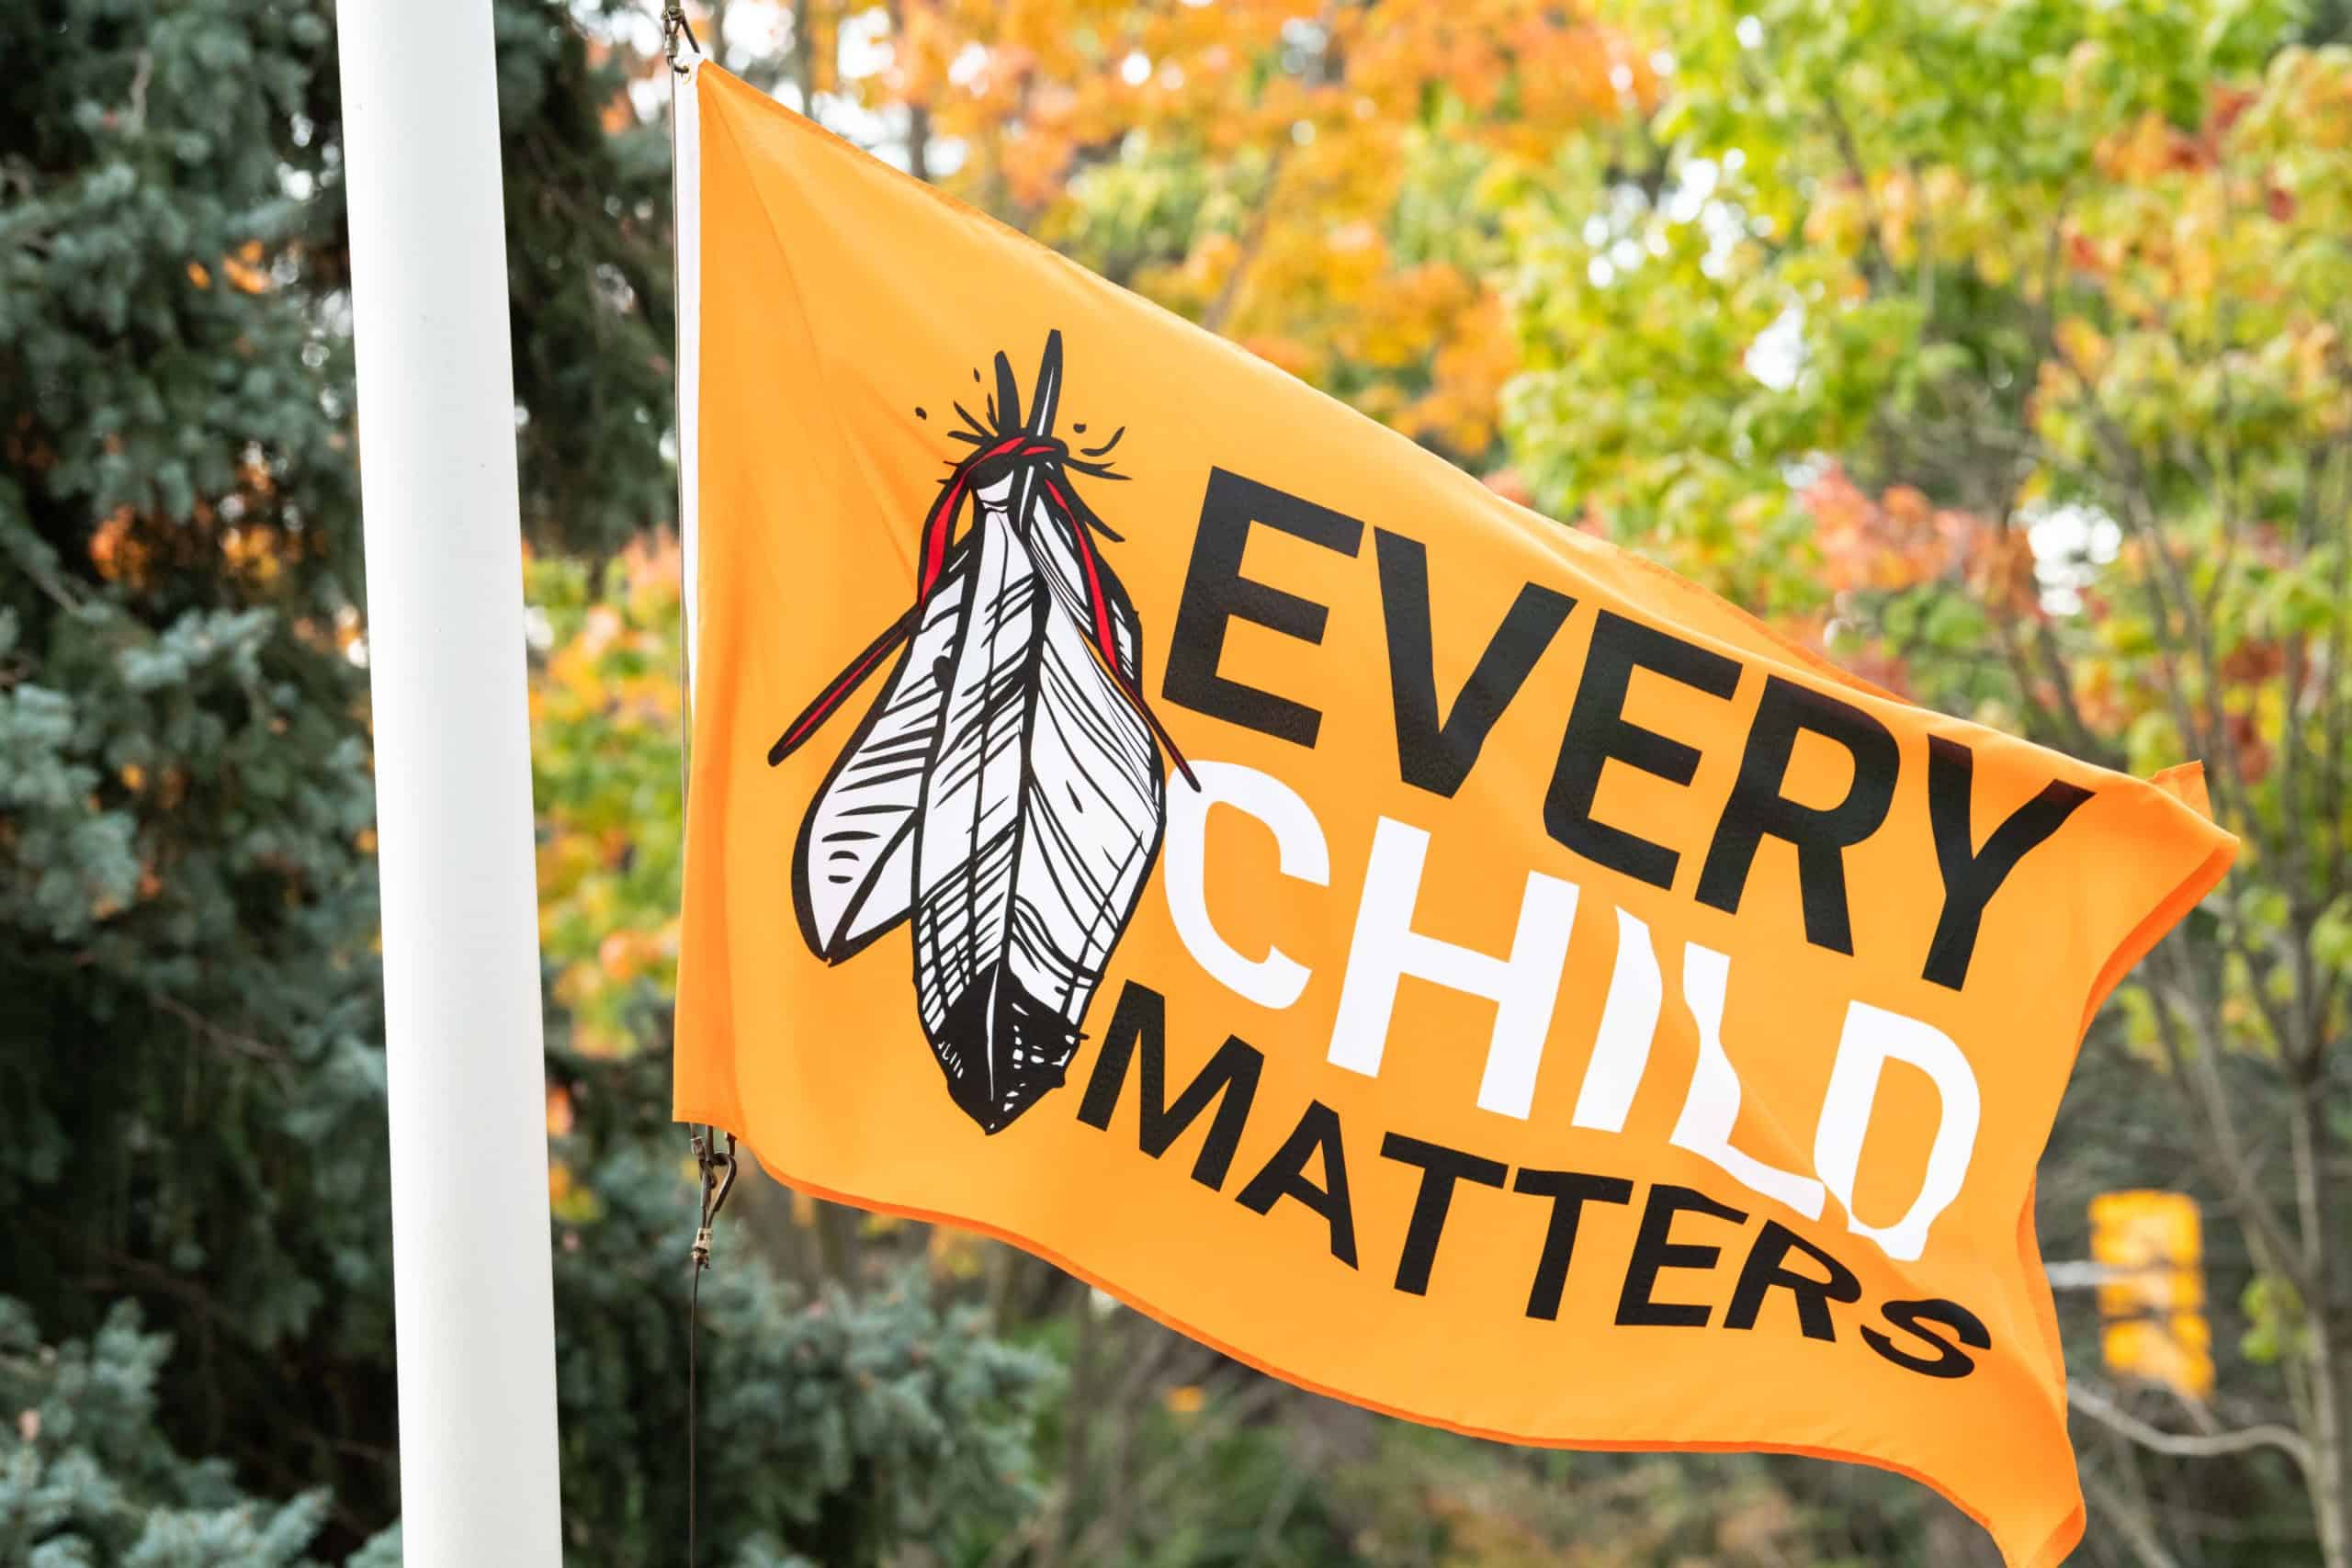 Every child matters National Day for Truth and Reconciliation Brampton